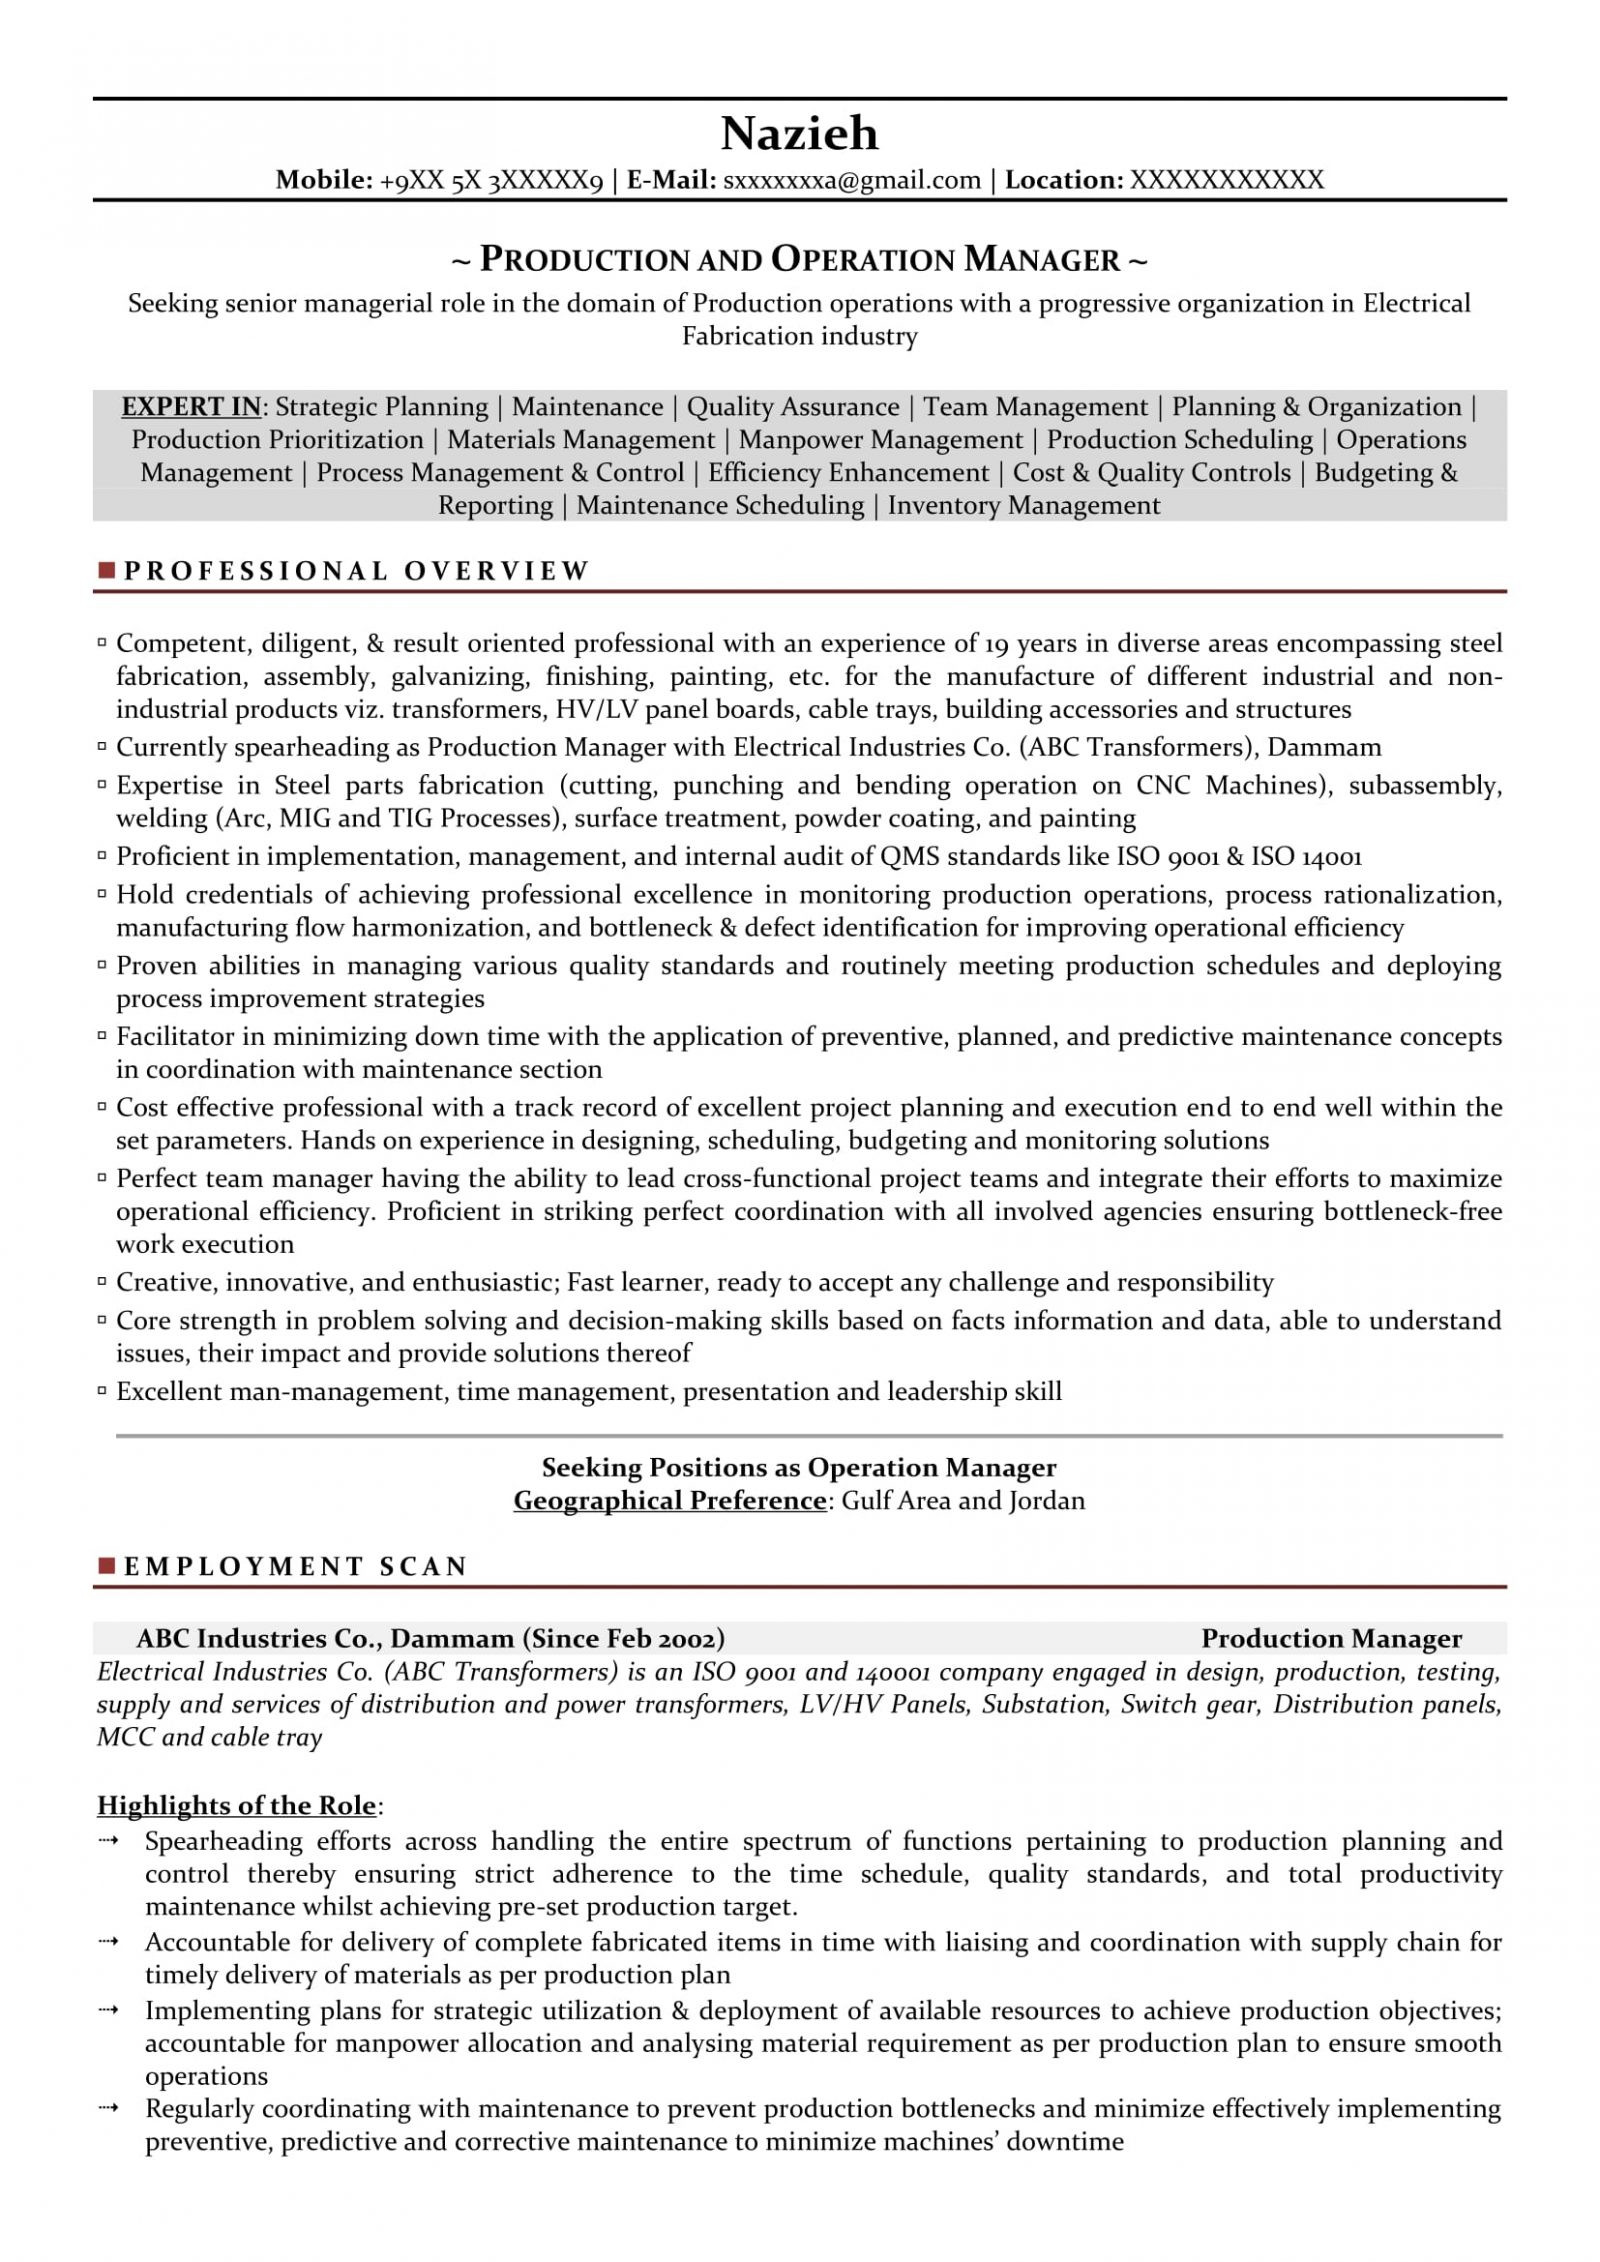 production manager sample resumes resume format templates manufact manufacturing supervisor cover letter summary template objective pdf samples example examples 1600x2262